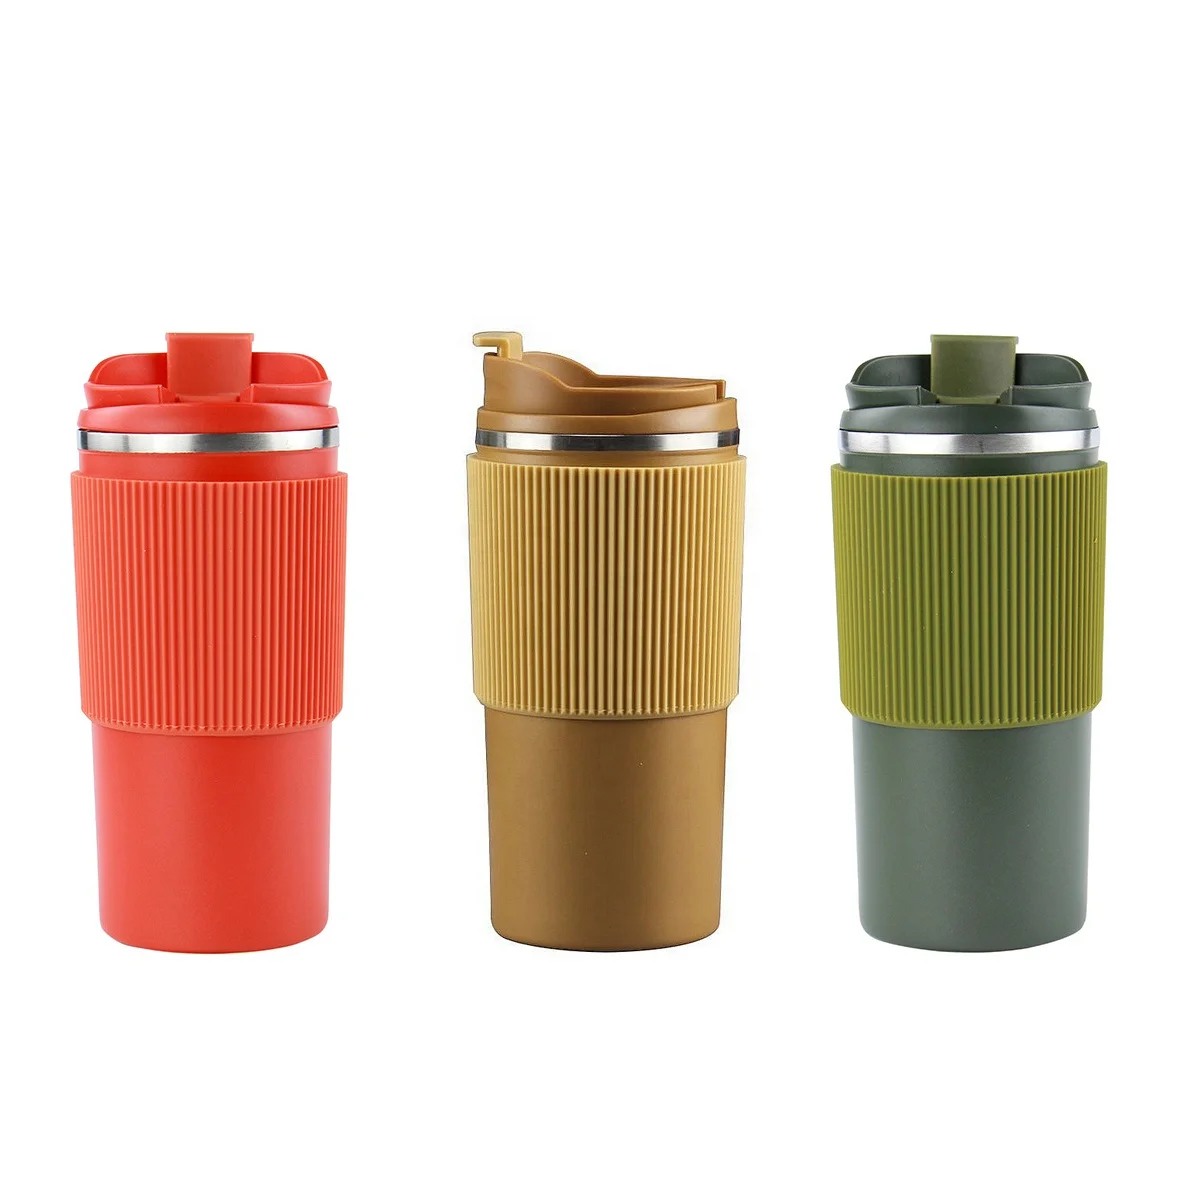 Double Wall Thermos Bottle Large Capacity Stainless Steel Car Mug Insulated Cup